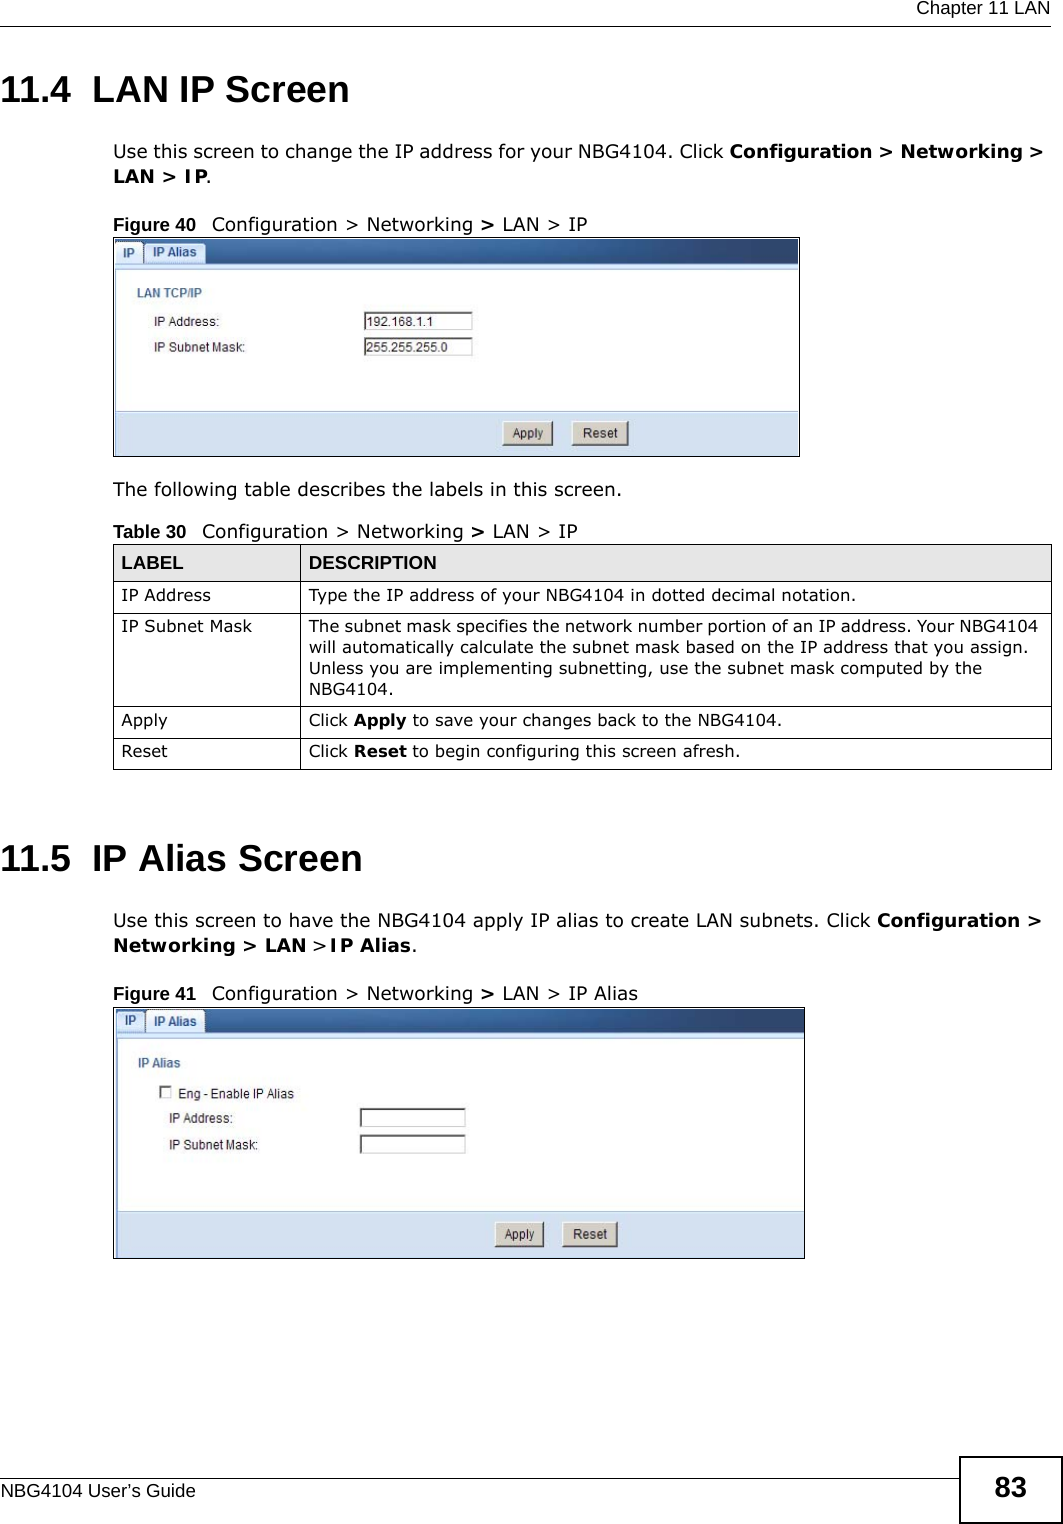  Chapter 11 LANNBG4104 User’s Guide 8311.4  LAN IP ScreenUse this screen to change the IP address for your NBG4104. Click Configuration &gt; Networking &gt; LAN &gt; IP.Figure 40   Configuration &gt; Networking &gt; LAN &gt; IP The following table describes the labels in this screen.11.5  IP Alias ScreenUse this screen to have the NBG4104 apply IP alias to create LAN subnets. Click Configuration &gt; Networking &gt; LAN &gt; IP Alias.Figure 41   Configuration &gt; Networking &gt; LAN &gt; IP Alias Table 30   Configuration &gt; Networking &gt; LAN &gt; IPLABEL DESCRIPTIONIP Address Type the IP address of your NBG4104 in dotted decimal notation.IP Subnet Mask The subnet mask specifies the network number portion of an IP address. Your NBG4104 will automatically calculate the subnet mask based on the IP address that you assign. Unless you are implementing subnetting, use the subnet mask computed by the NBG4104.Apply Click Apply to save your changes back to the NBG4104.Reset Click Reset to begin configuring this screen afresh.